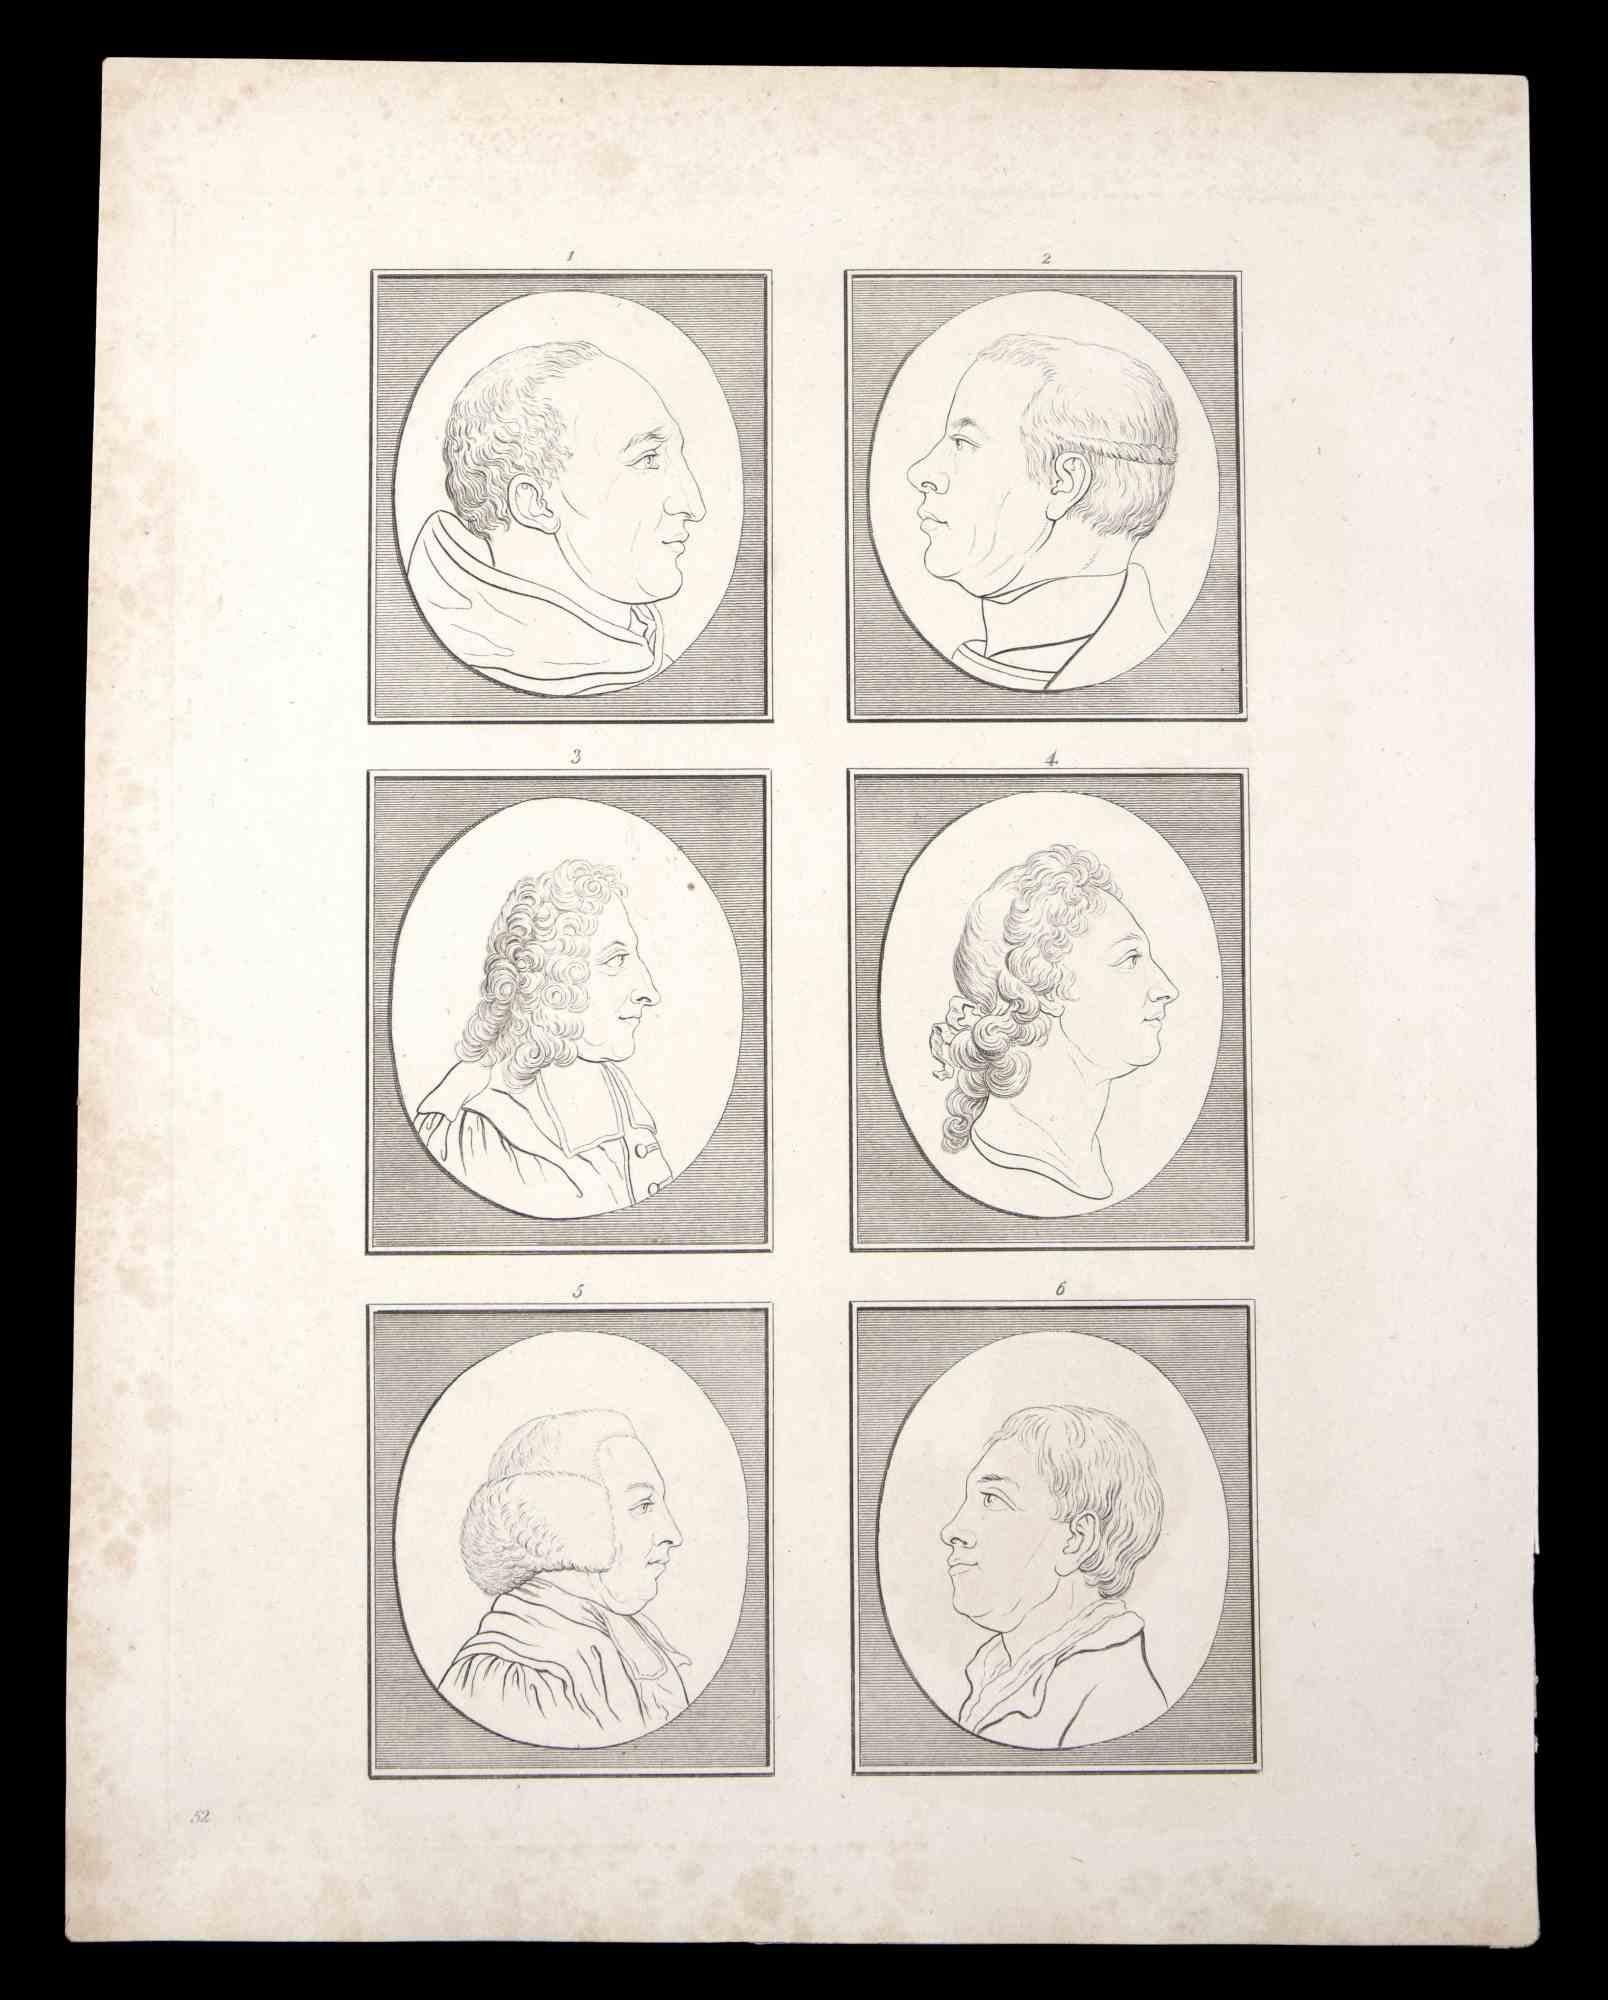 The profiles of men and women is an original etching artwork realized by Thomas Holloway for Johann Caspar Lavater's "Essays on Physiognomy, Designed to Promote the Knowledge and the Love of Mankind", London, Bensley, 1810. 

This artwork represents